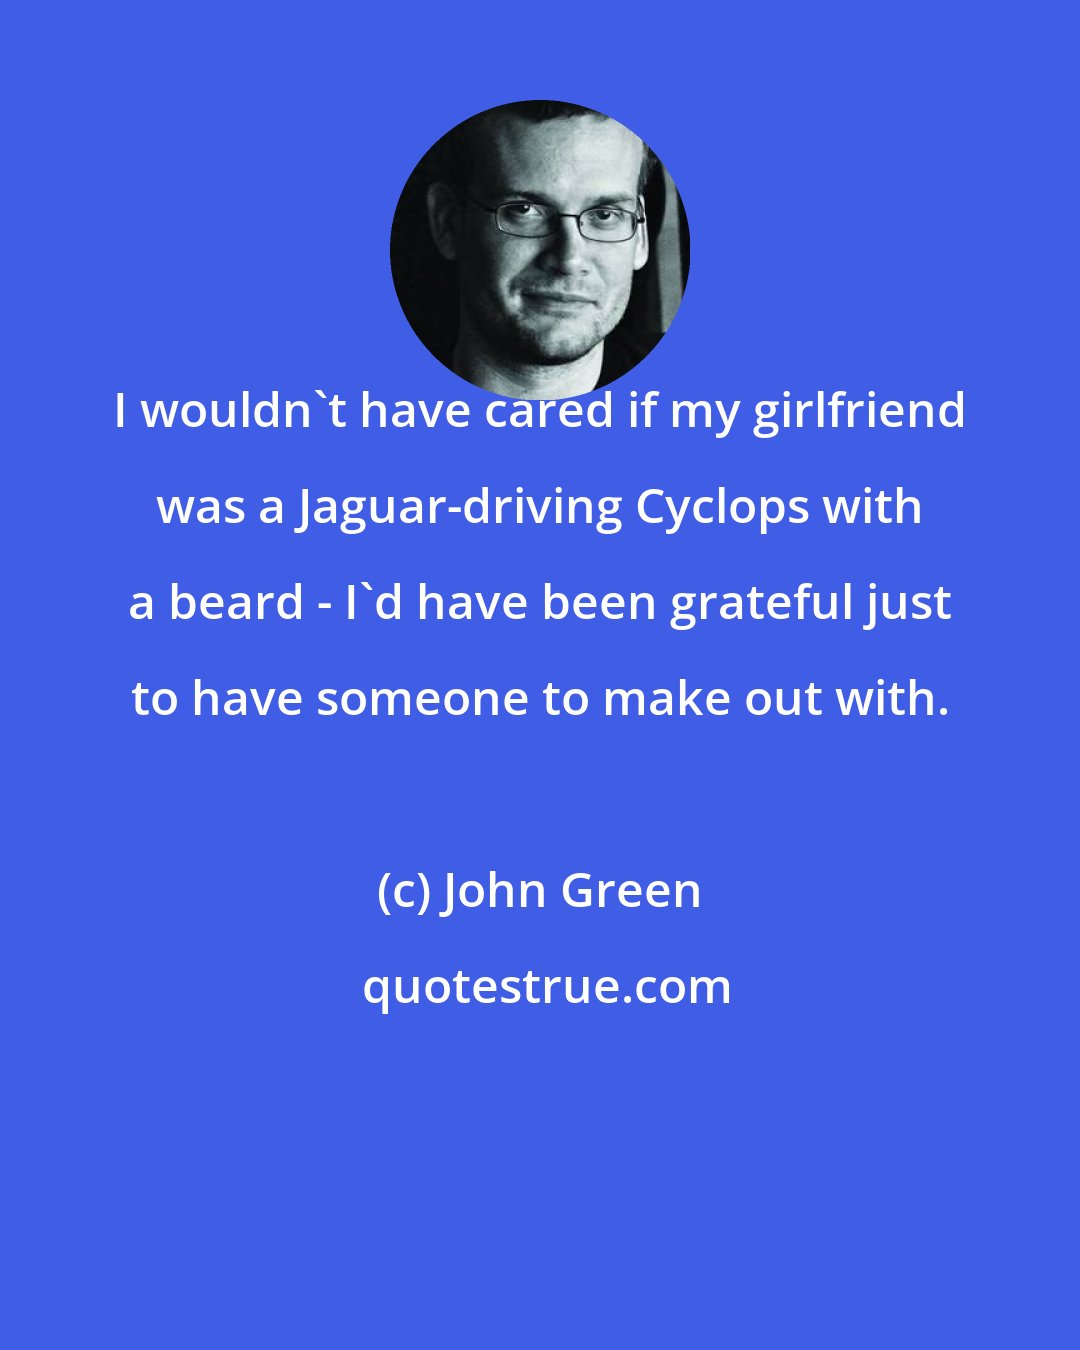 John Green: I wouldn't have cared if my girlfriend was a Jaguar-driving Cyclops with a beard - I'd have been grateful just to have someone to make out with.